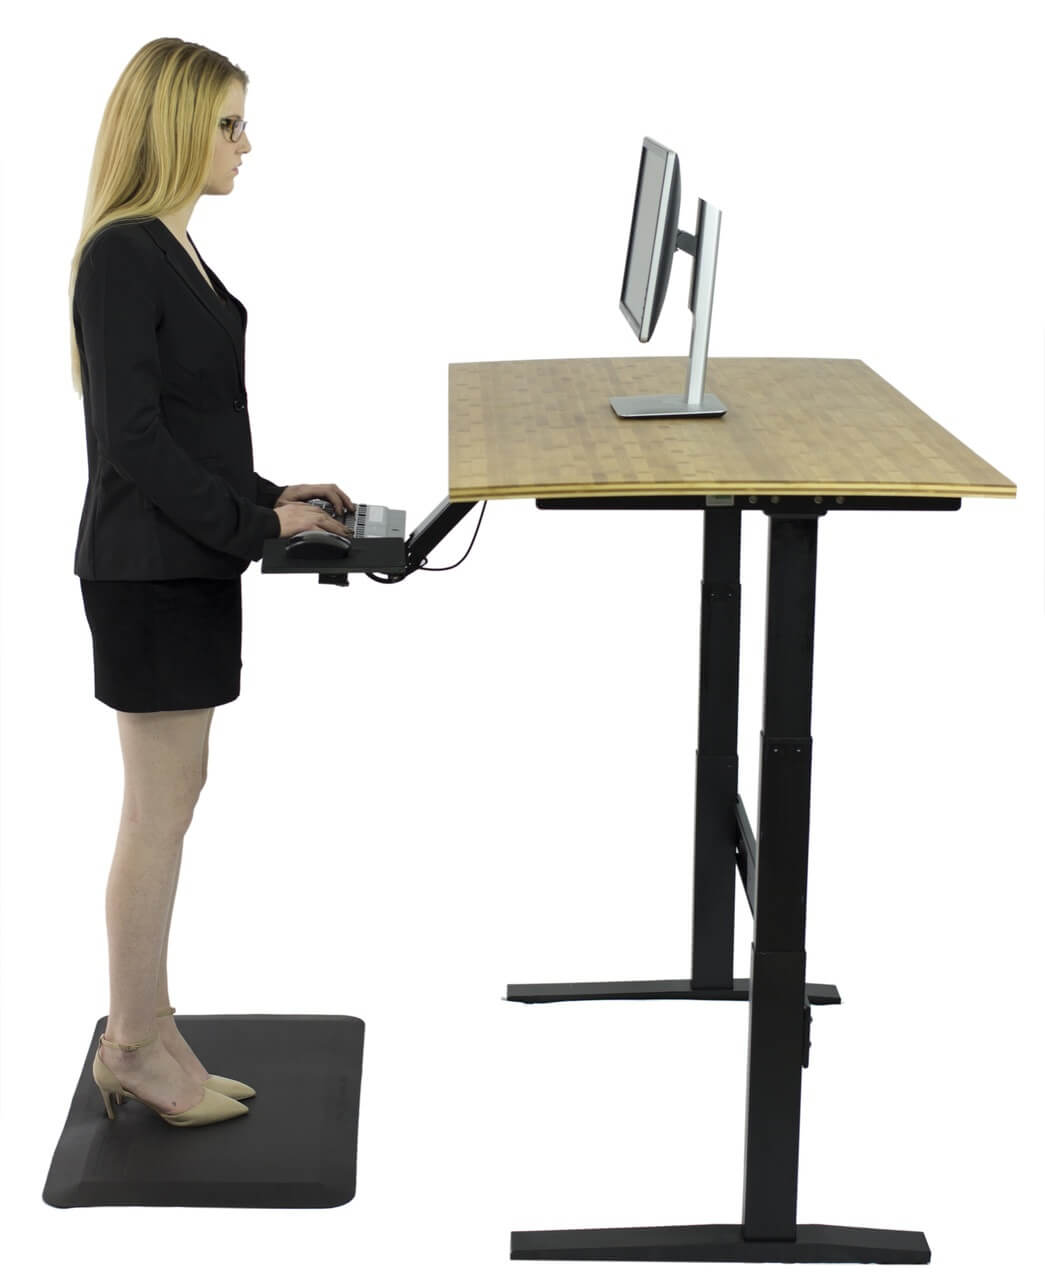 Principles of Ergonomics in the Workplace